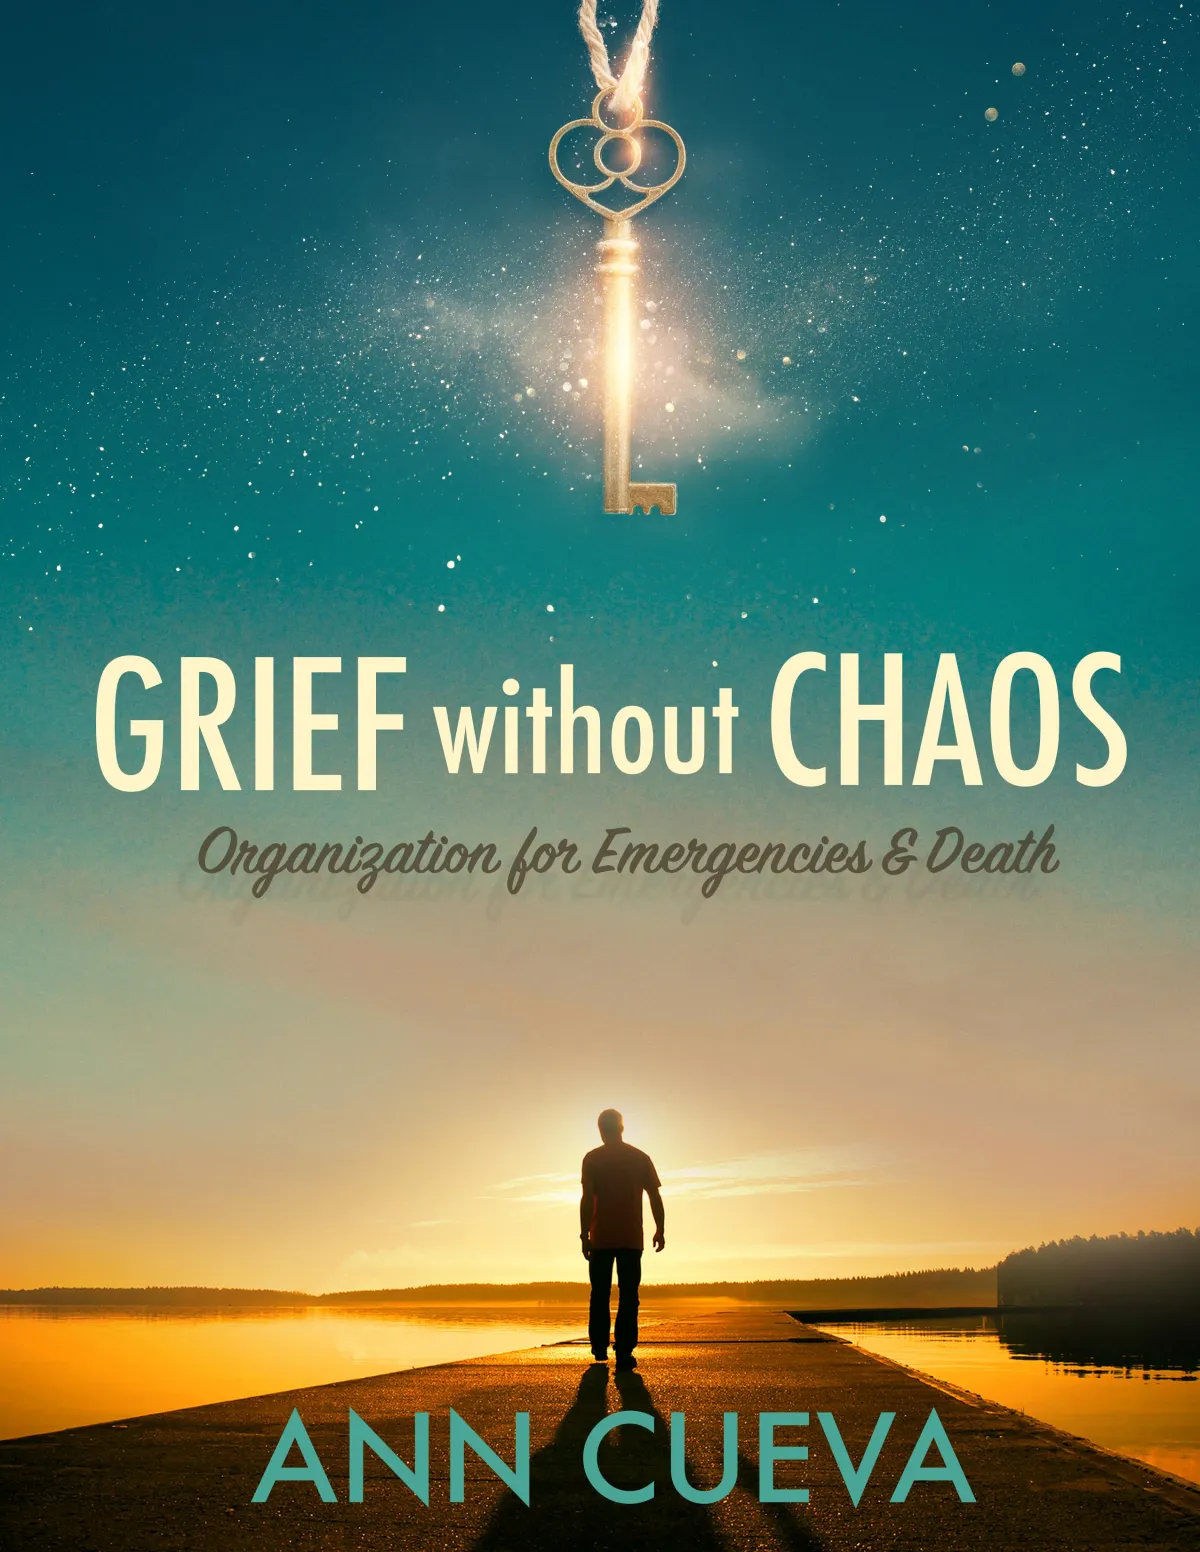 Grief Without Chaos™